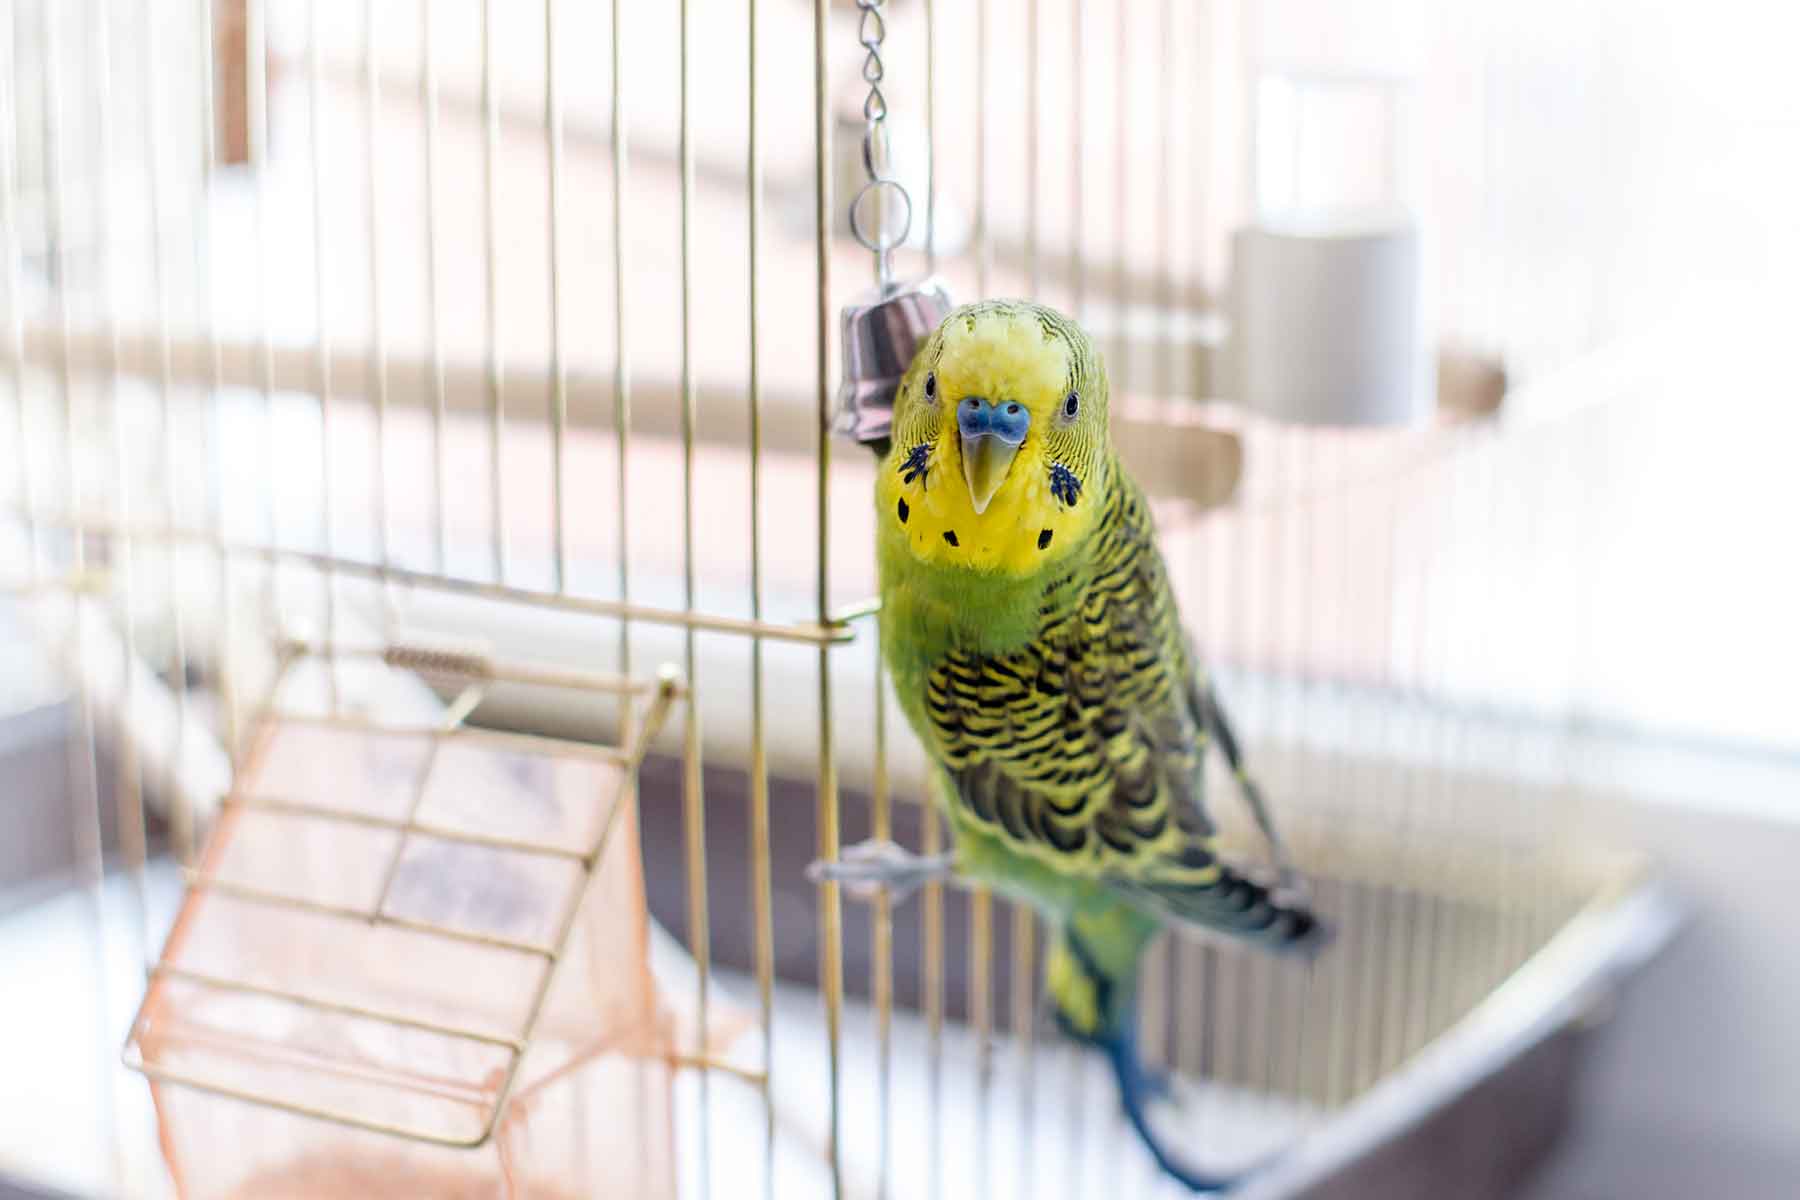 The ‘Perfect home’ for pet birds